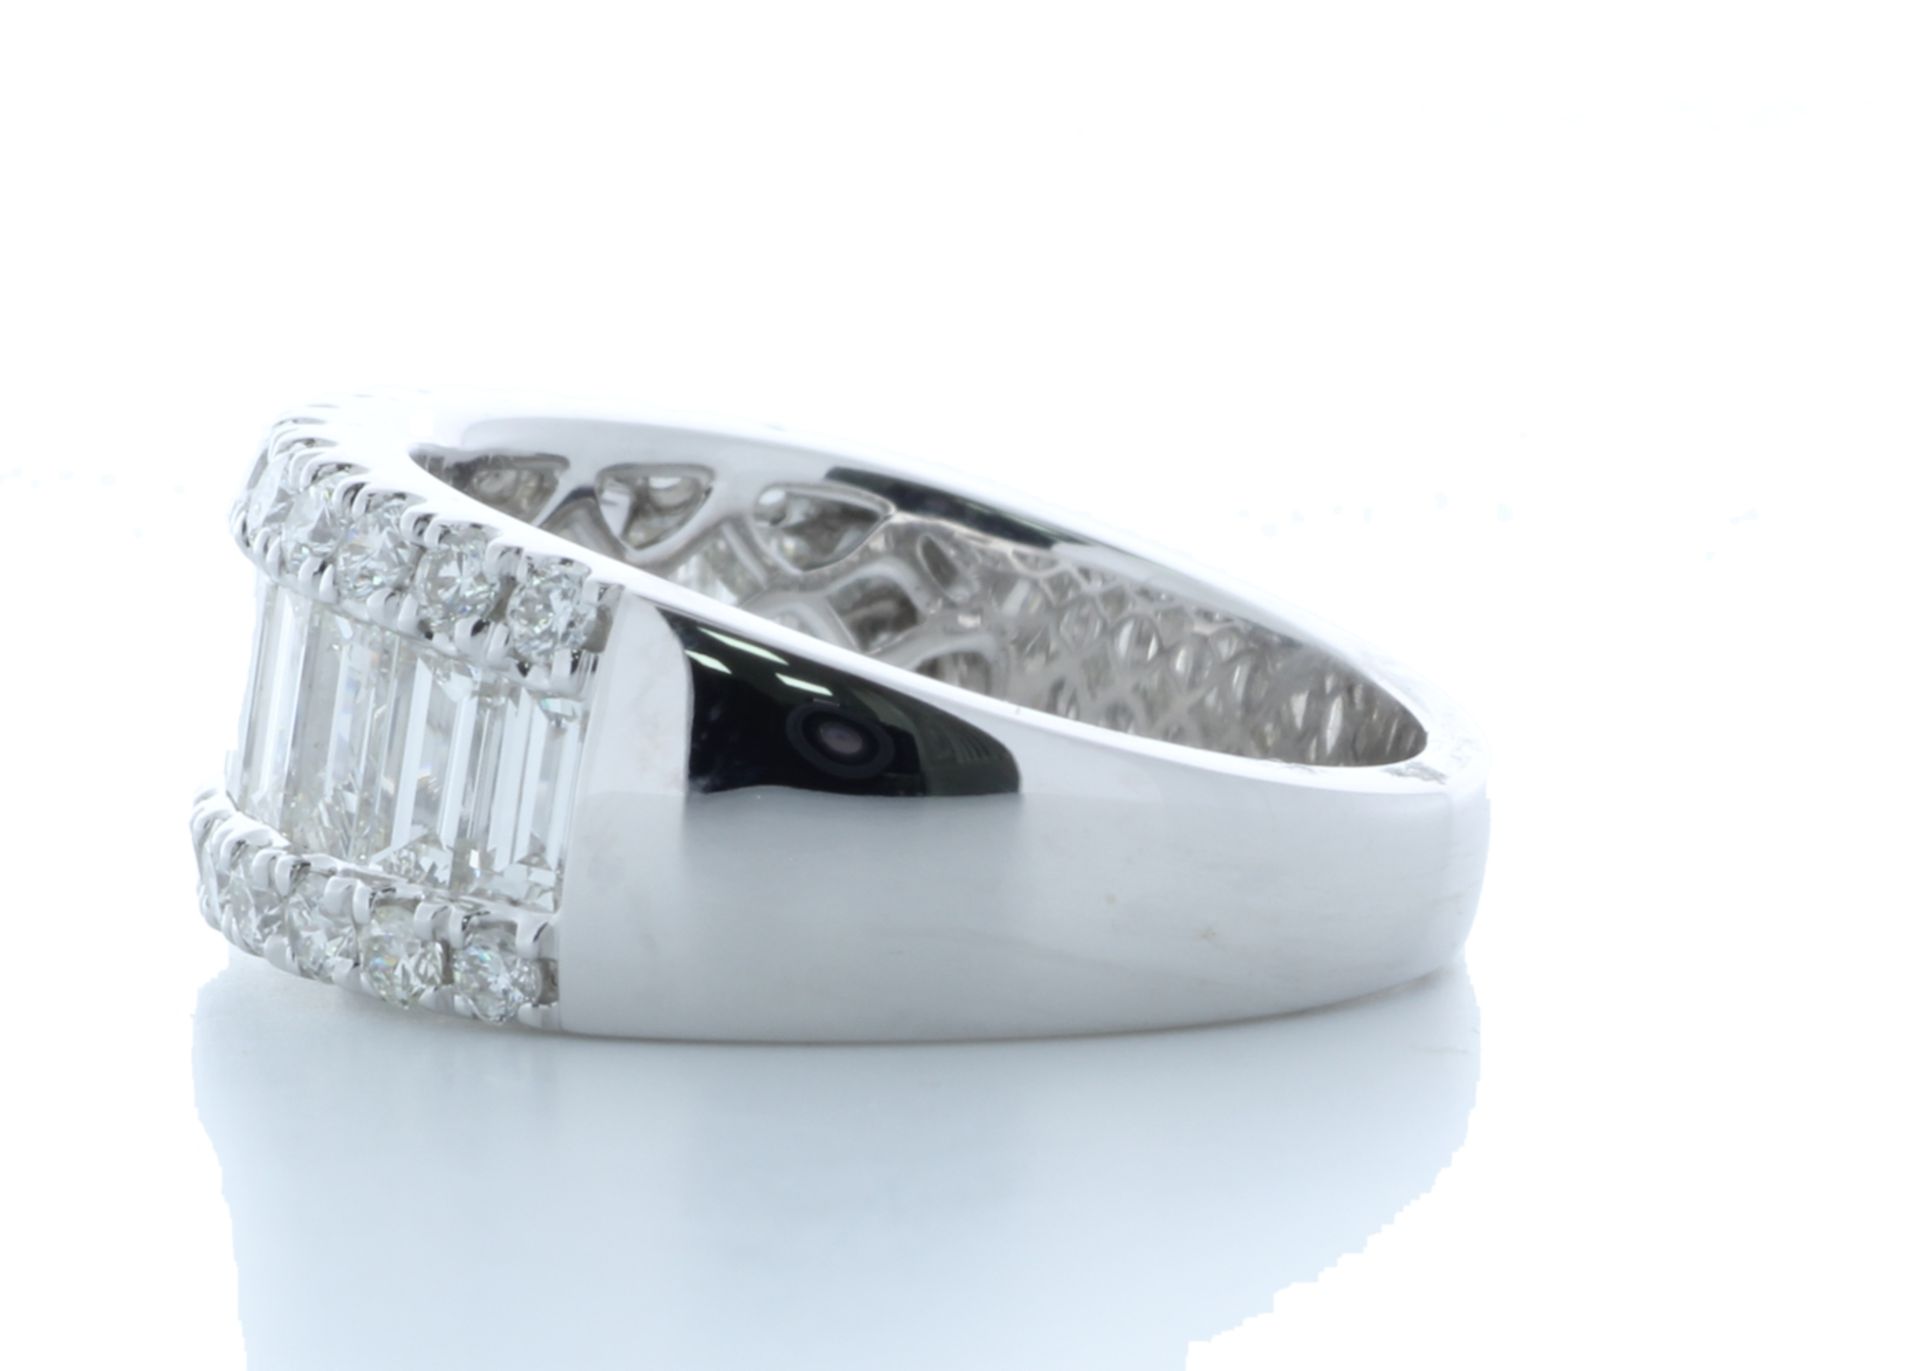 18ct White Gold Channel Set Semi Eternity Diamond Ring 2.34 Carats - Valued by AGI £17,600.00 - 18ct - Image 2 of 4